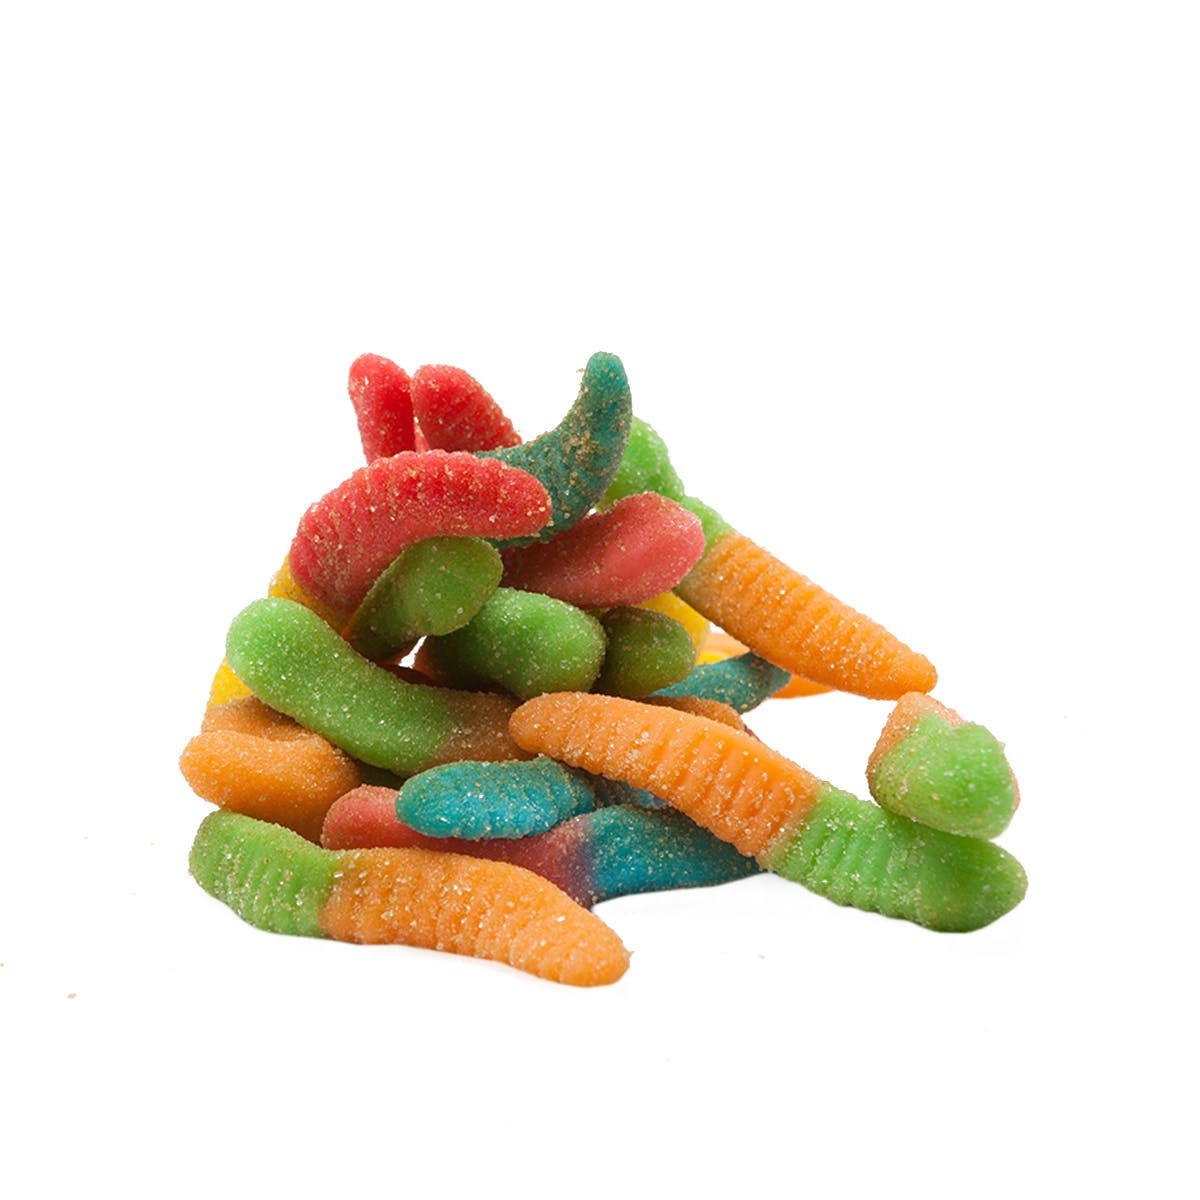 edible-remedy-plus-space-worms-300mg